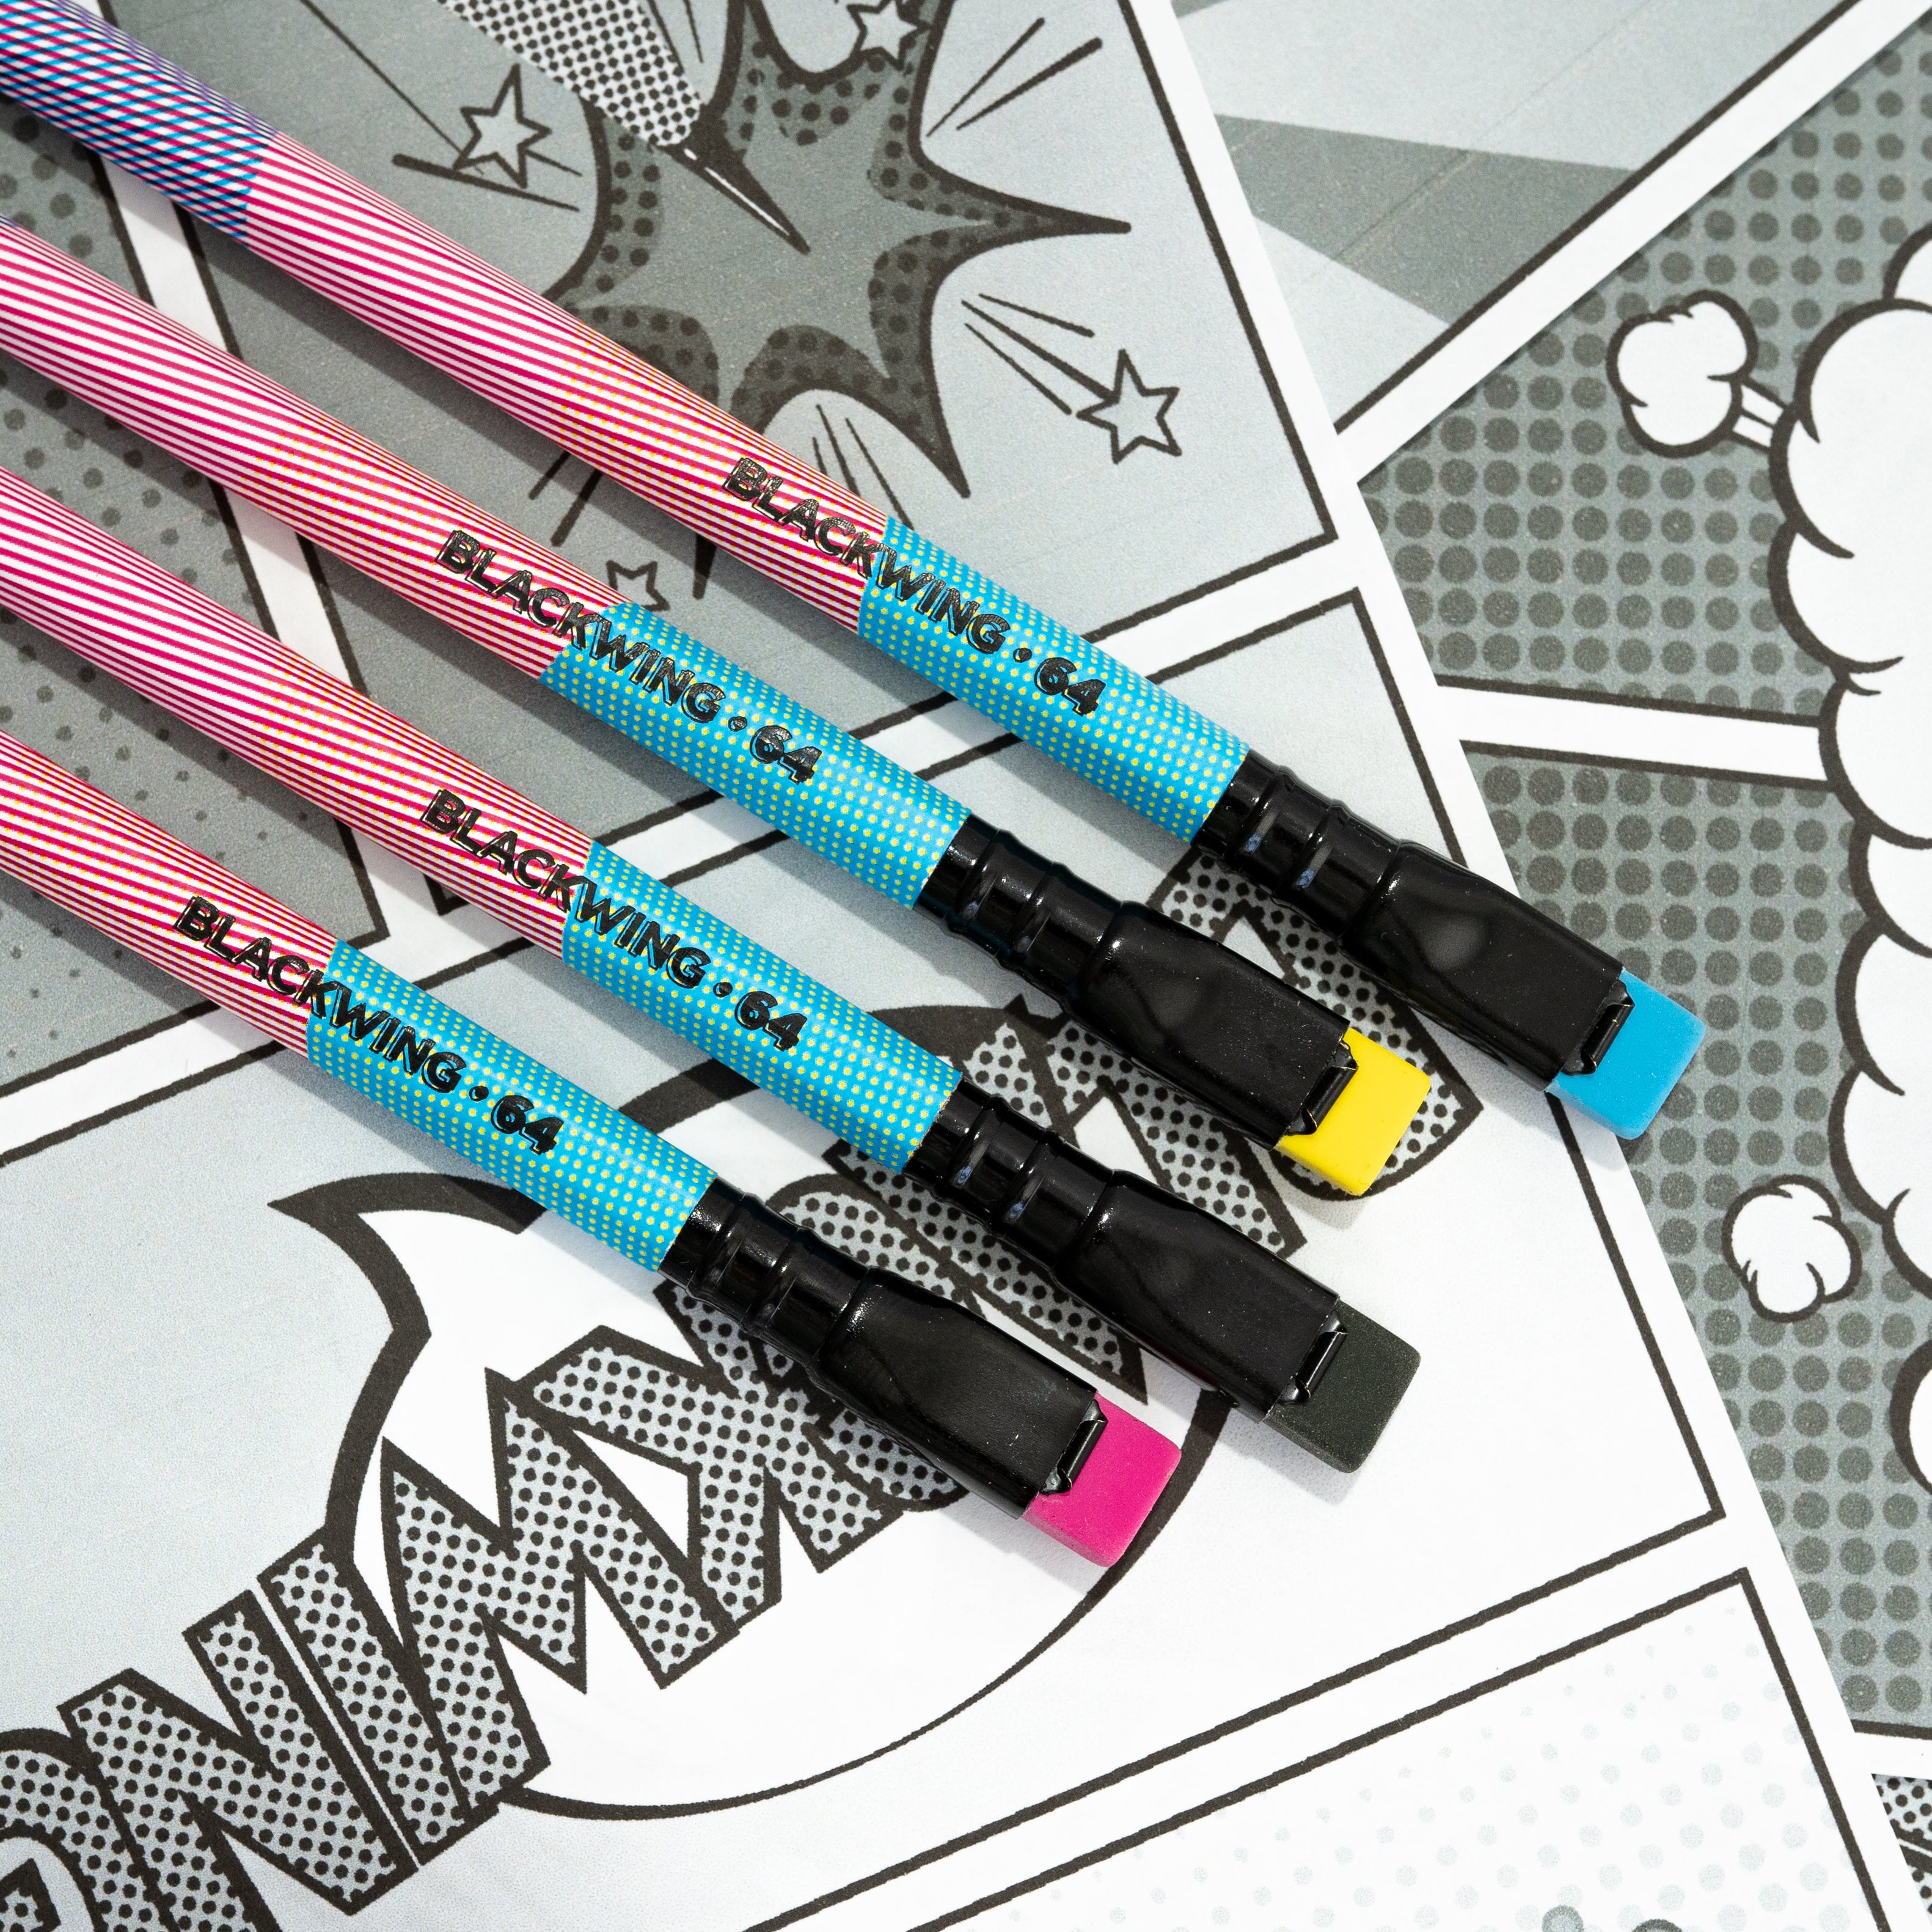 Colorful Blackwing Volume 64 replacement erasers on a comic book-style background.